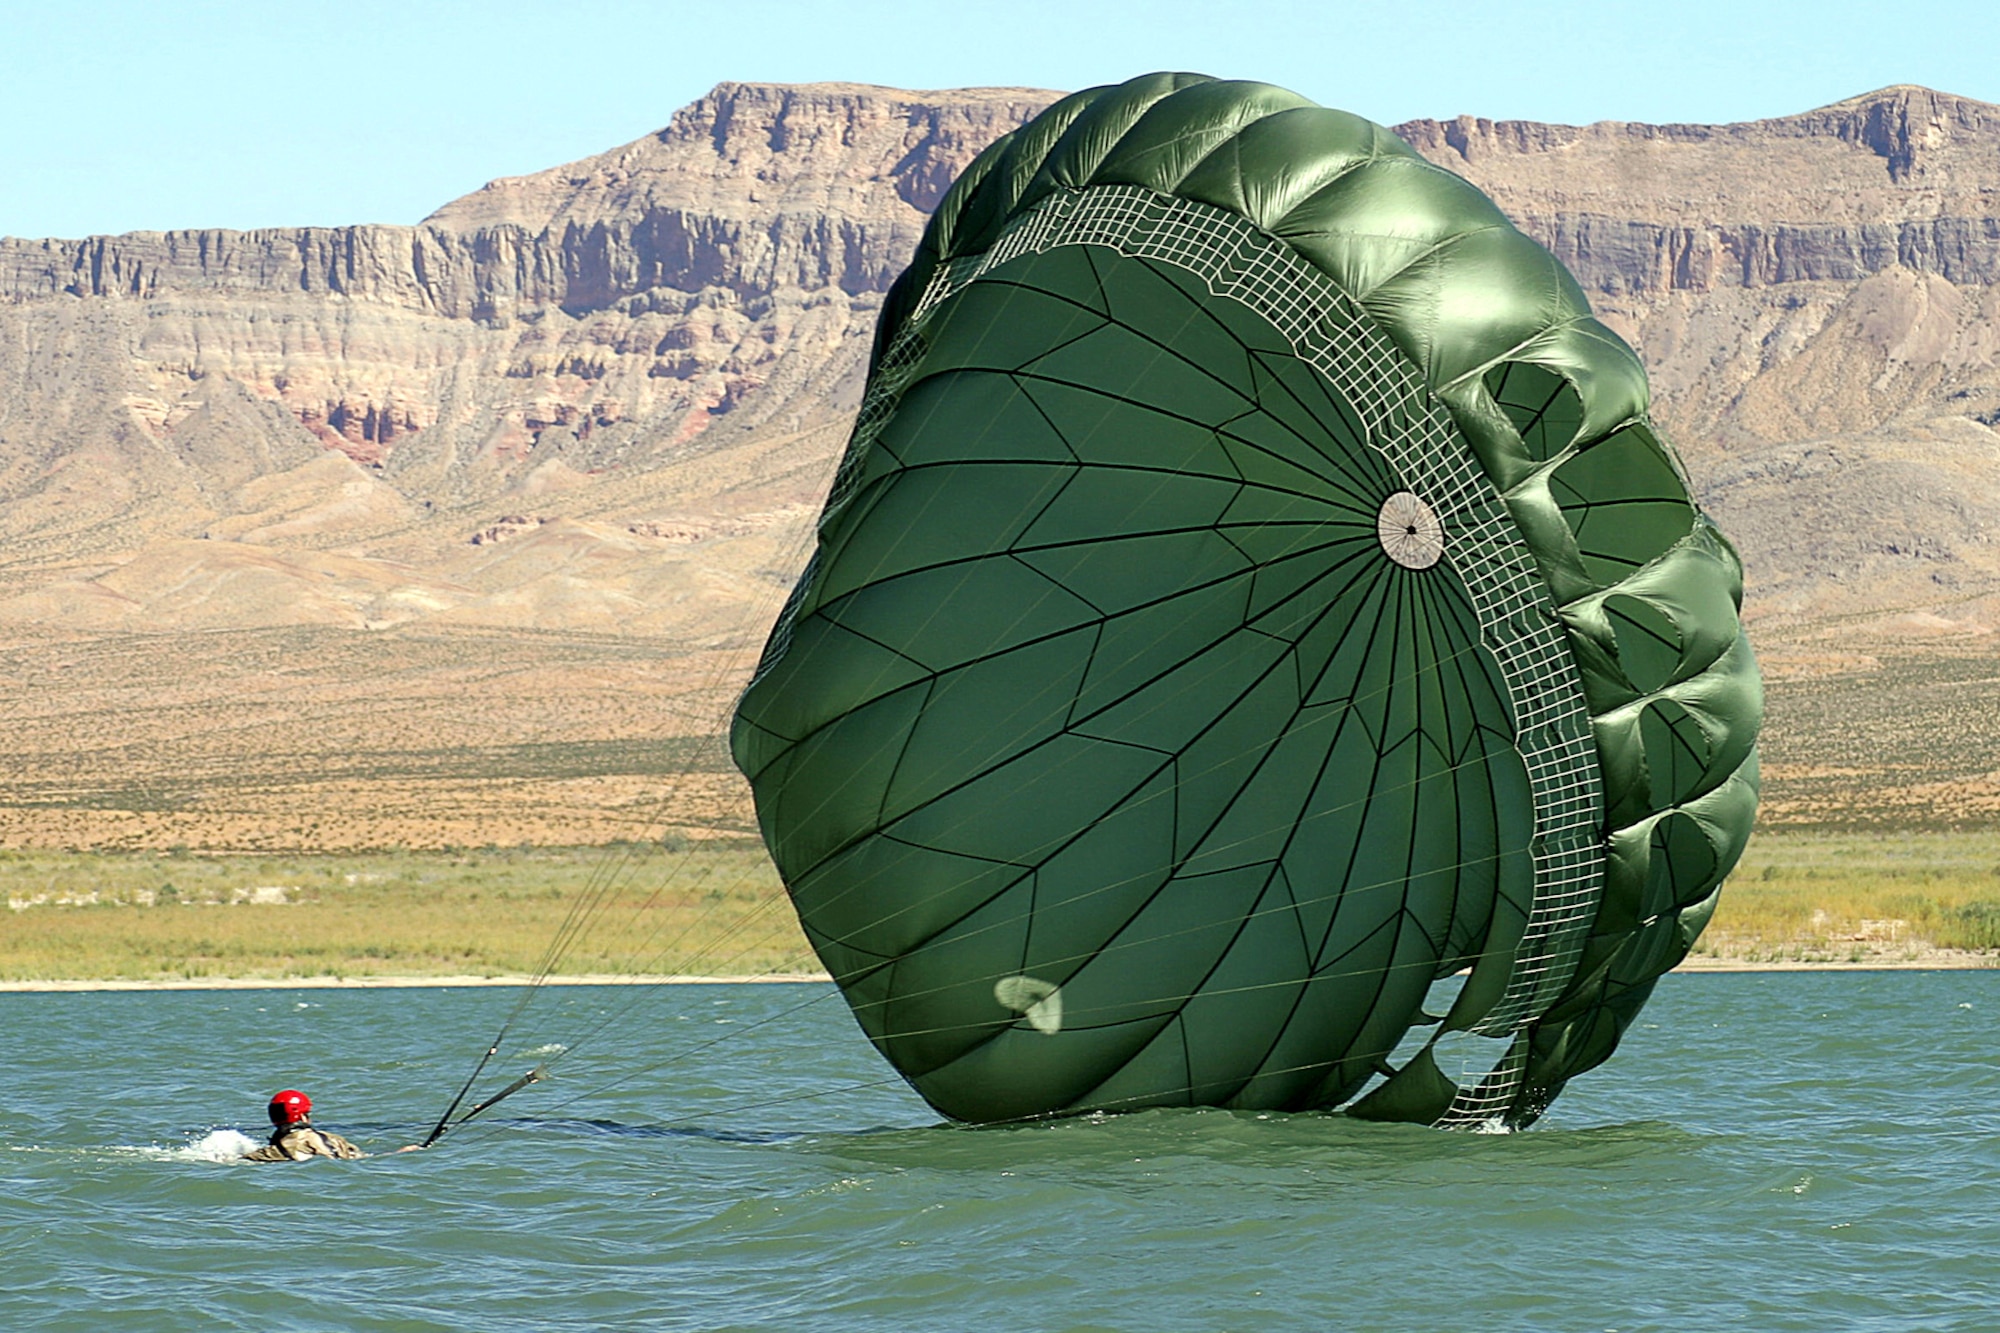 NELLIS AIR FORCE BASE, Nev. -- Senior Airman Christopher Harding gathers his parachute after landing in Lake Mead. A pararescueman with the 55th Rescue Squadron here, he had just jumped out of a C-130 Hercules as part of a rescue and recovery exercise. The squadron has 16 pararescueman who were involved in recovery missions during Hurricane Katrina and Rita. (U.S. Air Force photo by Julie Ray)